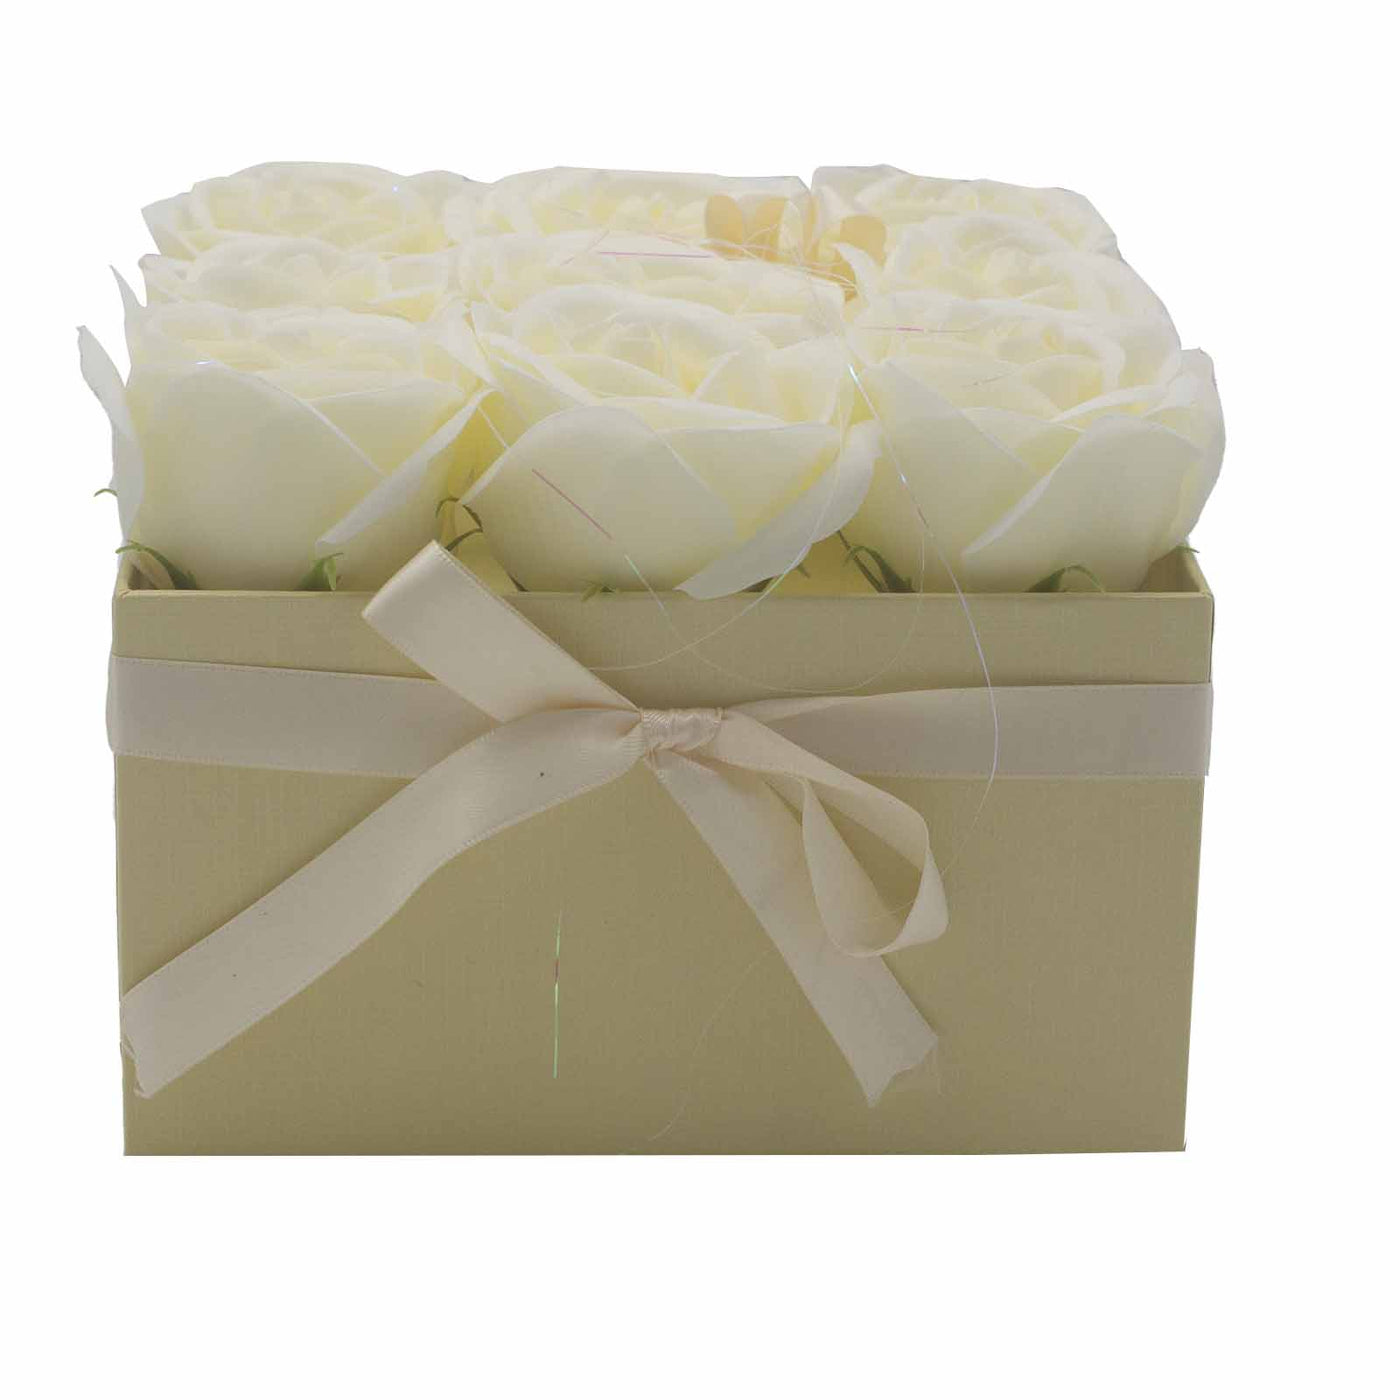 Body Soap Fragranced Flowers Gift Rose Bouquet - 9 Cream Roses In Gift Box.